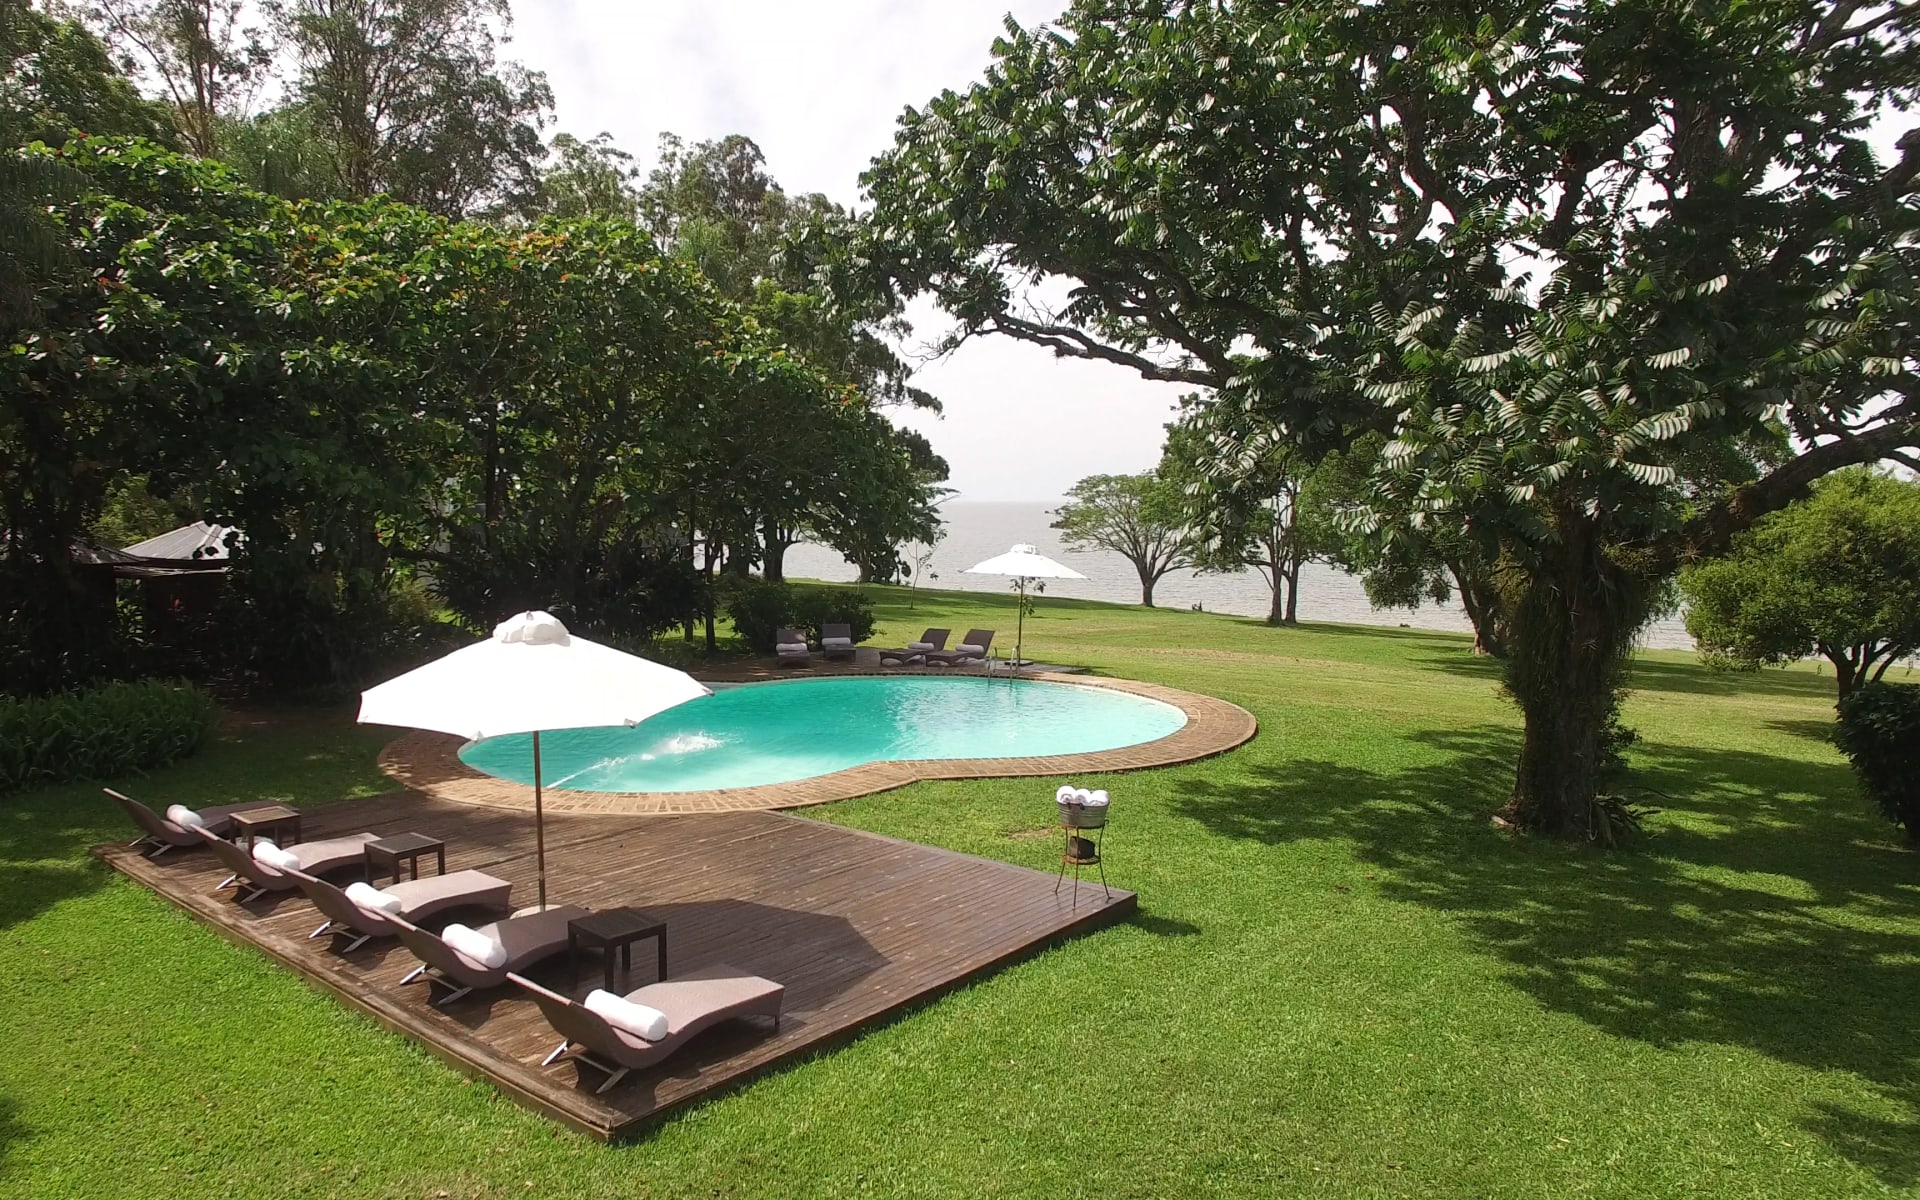 Five sun loungers with a white umbrella overlook a small swimming pool surrounded by trees and water.